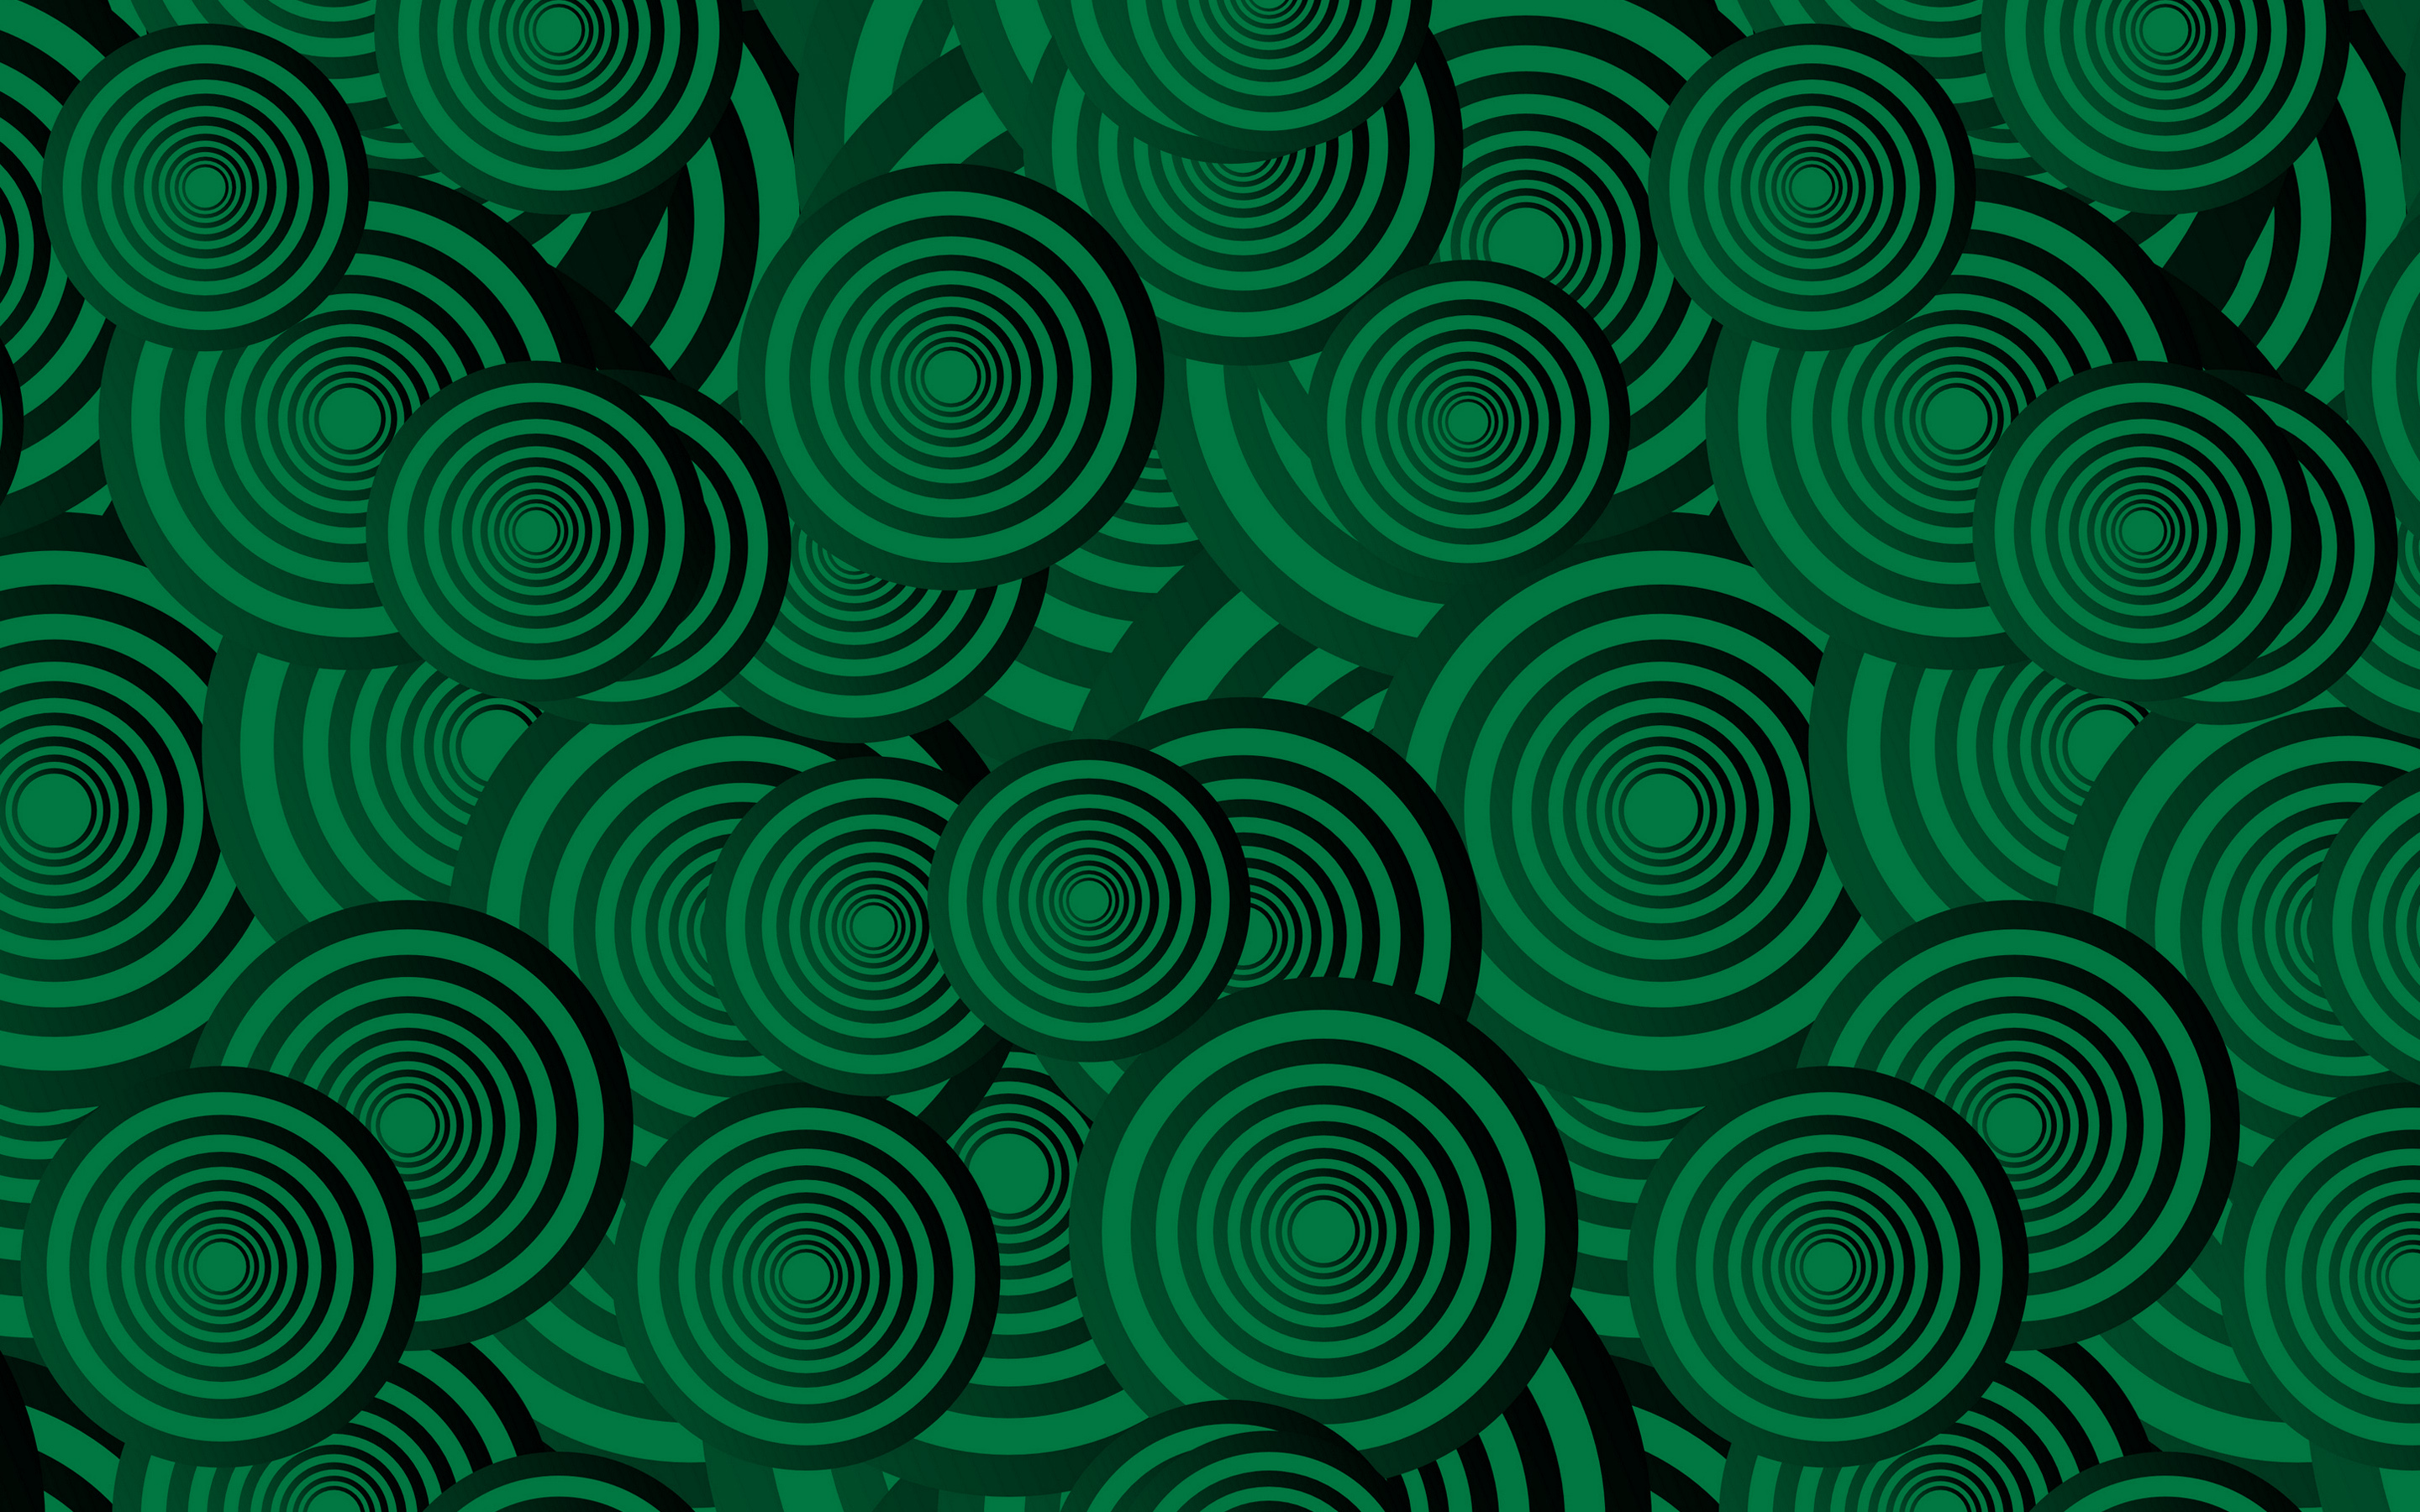 Download wallpaper dark green texture with circles, green circles texture, retro texture, dark creative background, green circles background for desktop with resolution 2880x1800. High Quality HD picture wallpaper